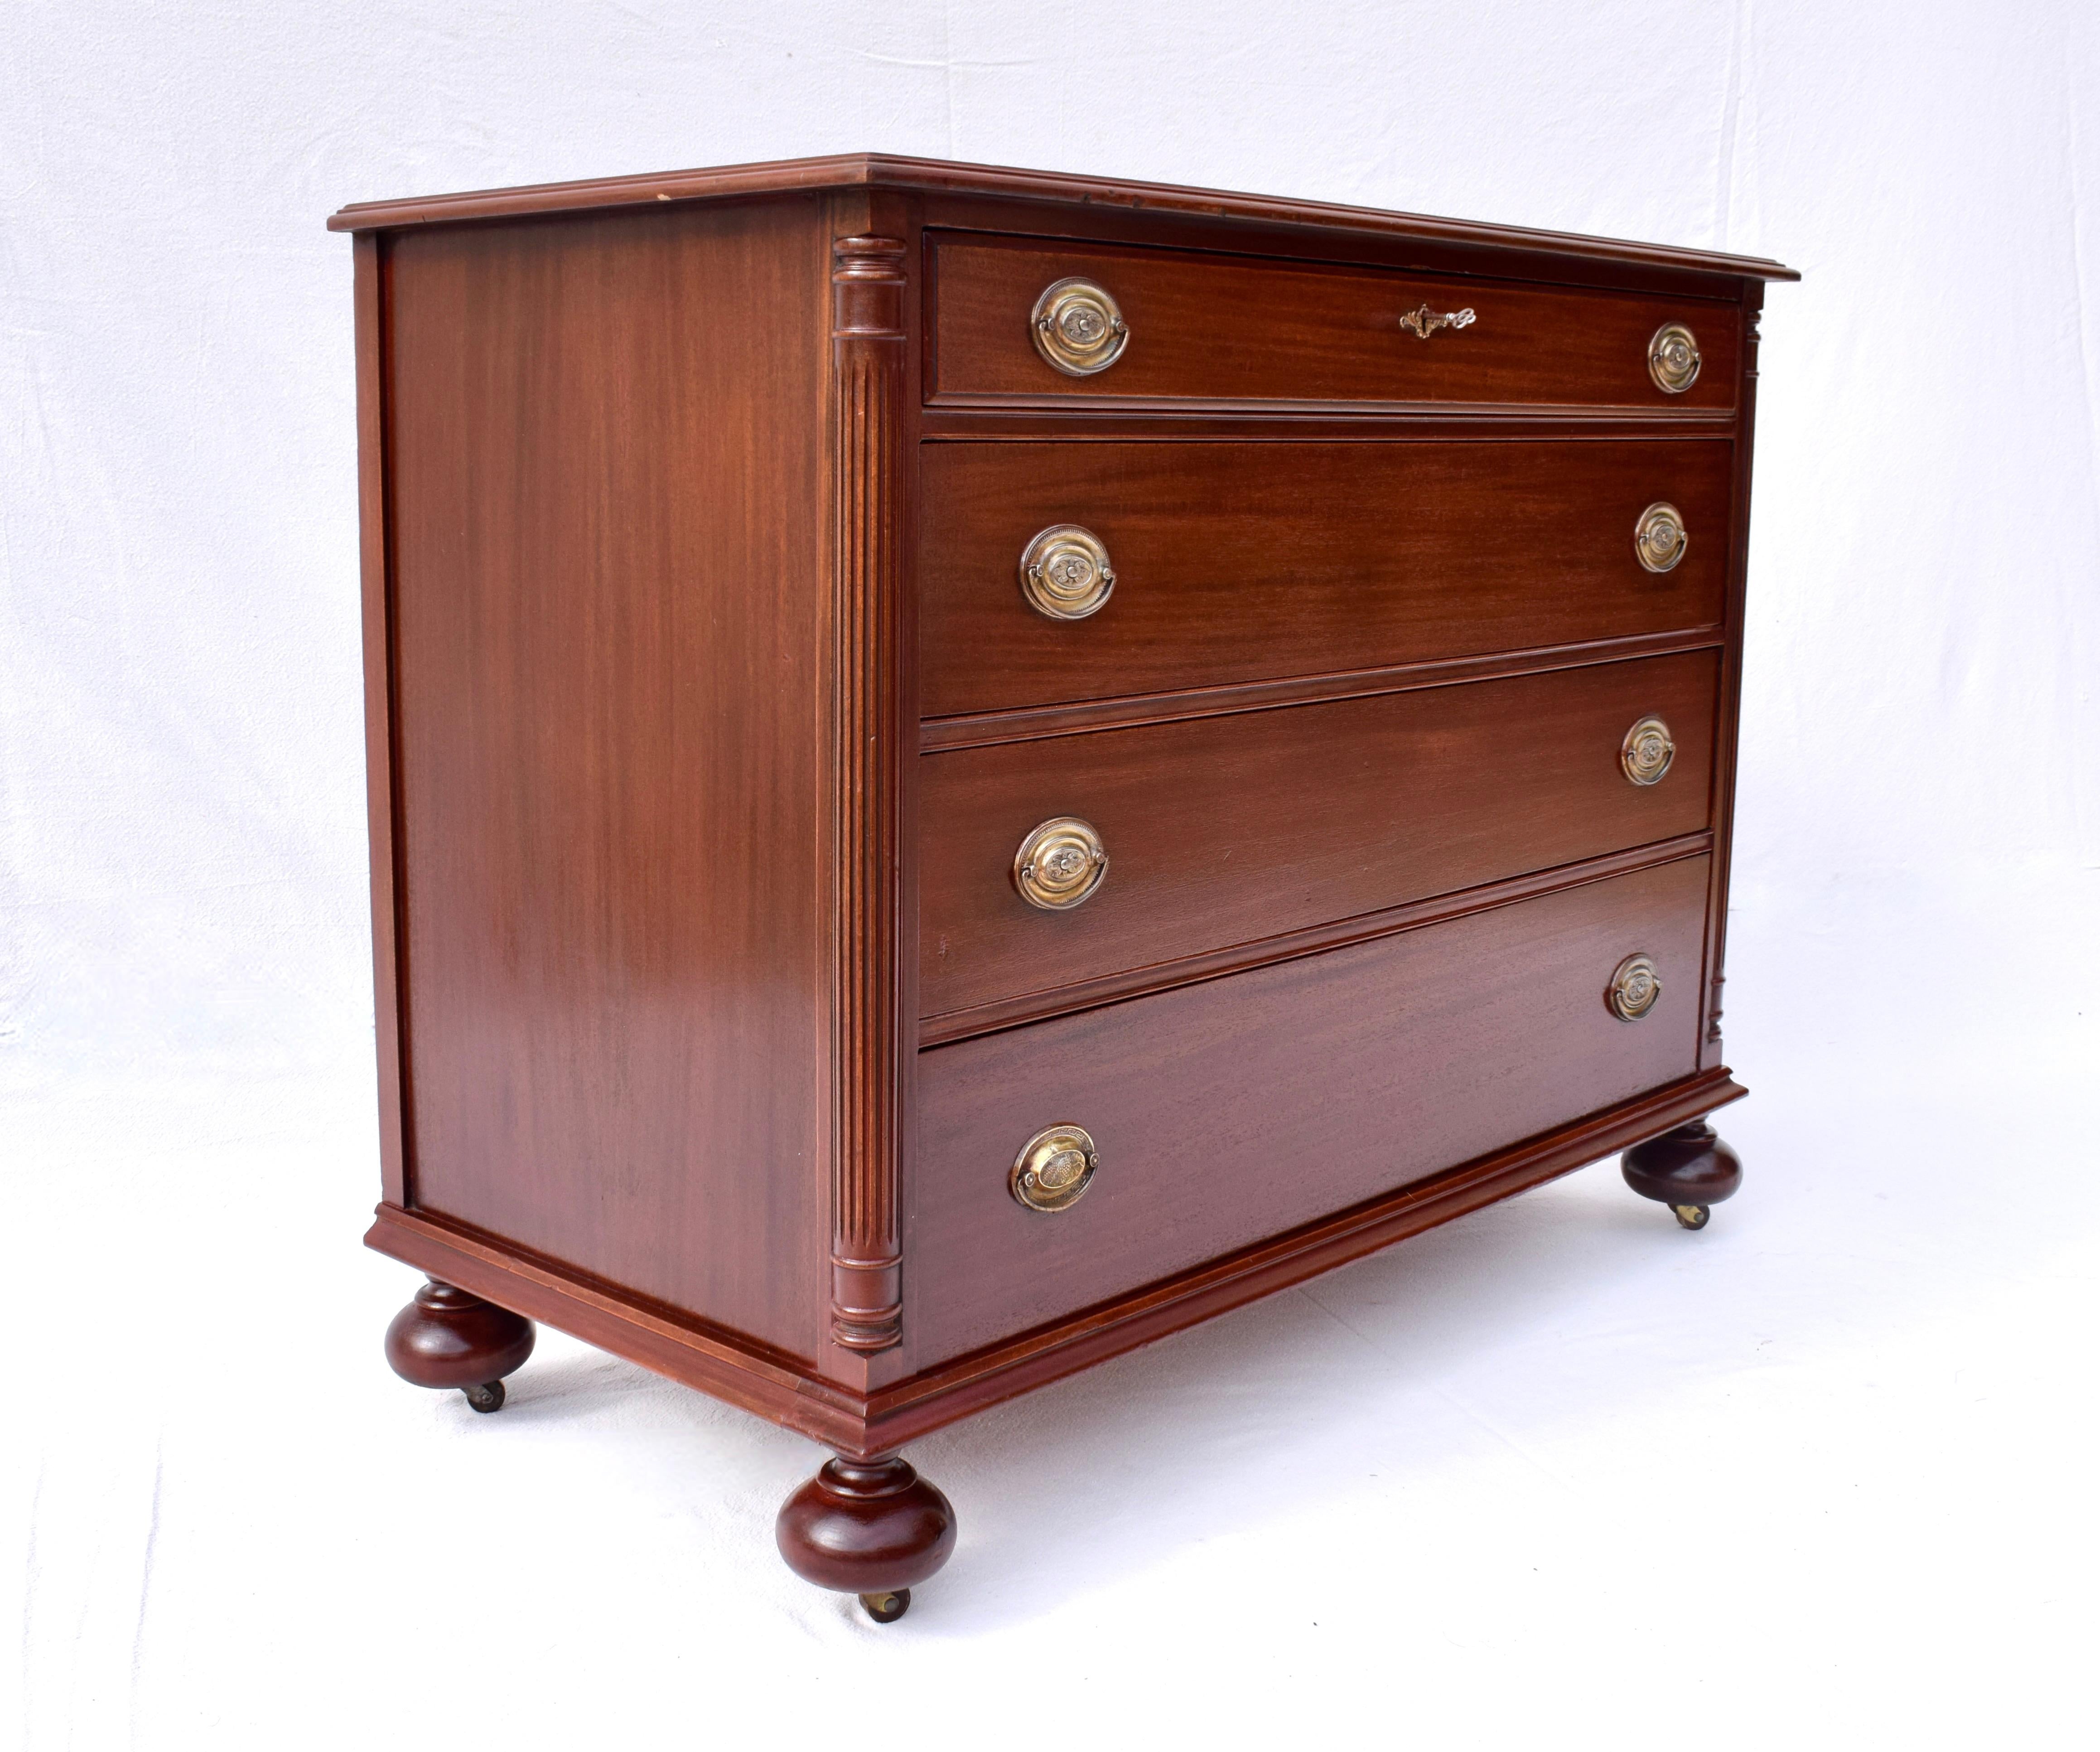 20th Century Mahogany Chest of Drawers With Cannonball Feet